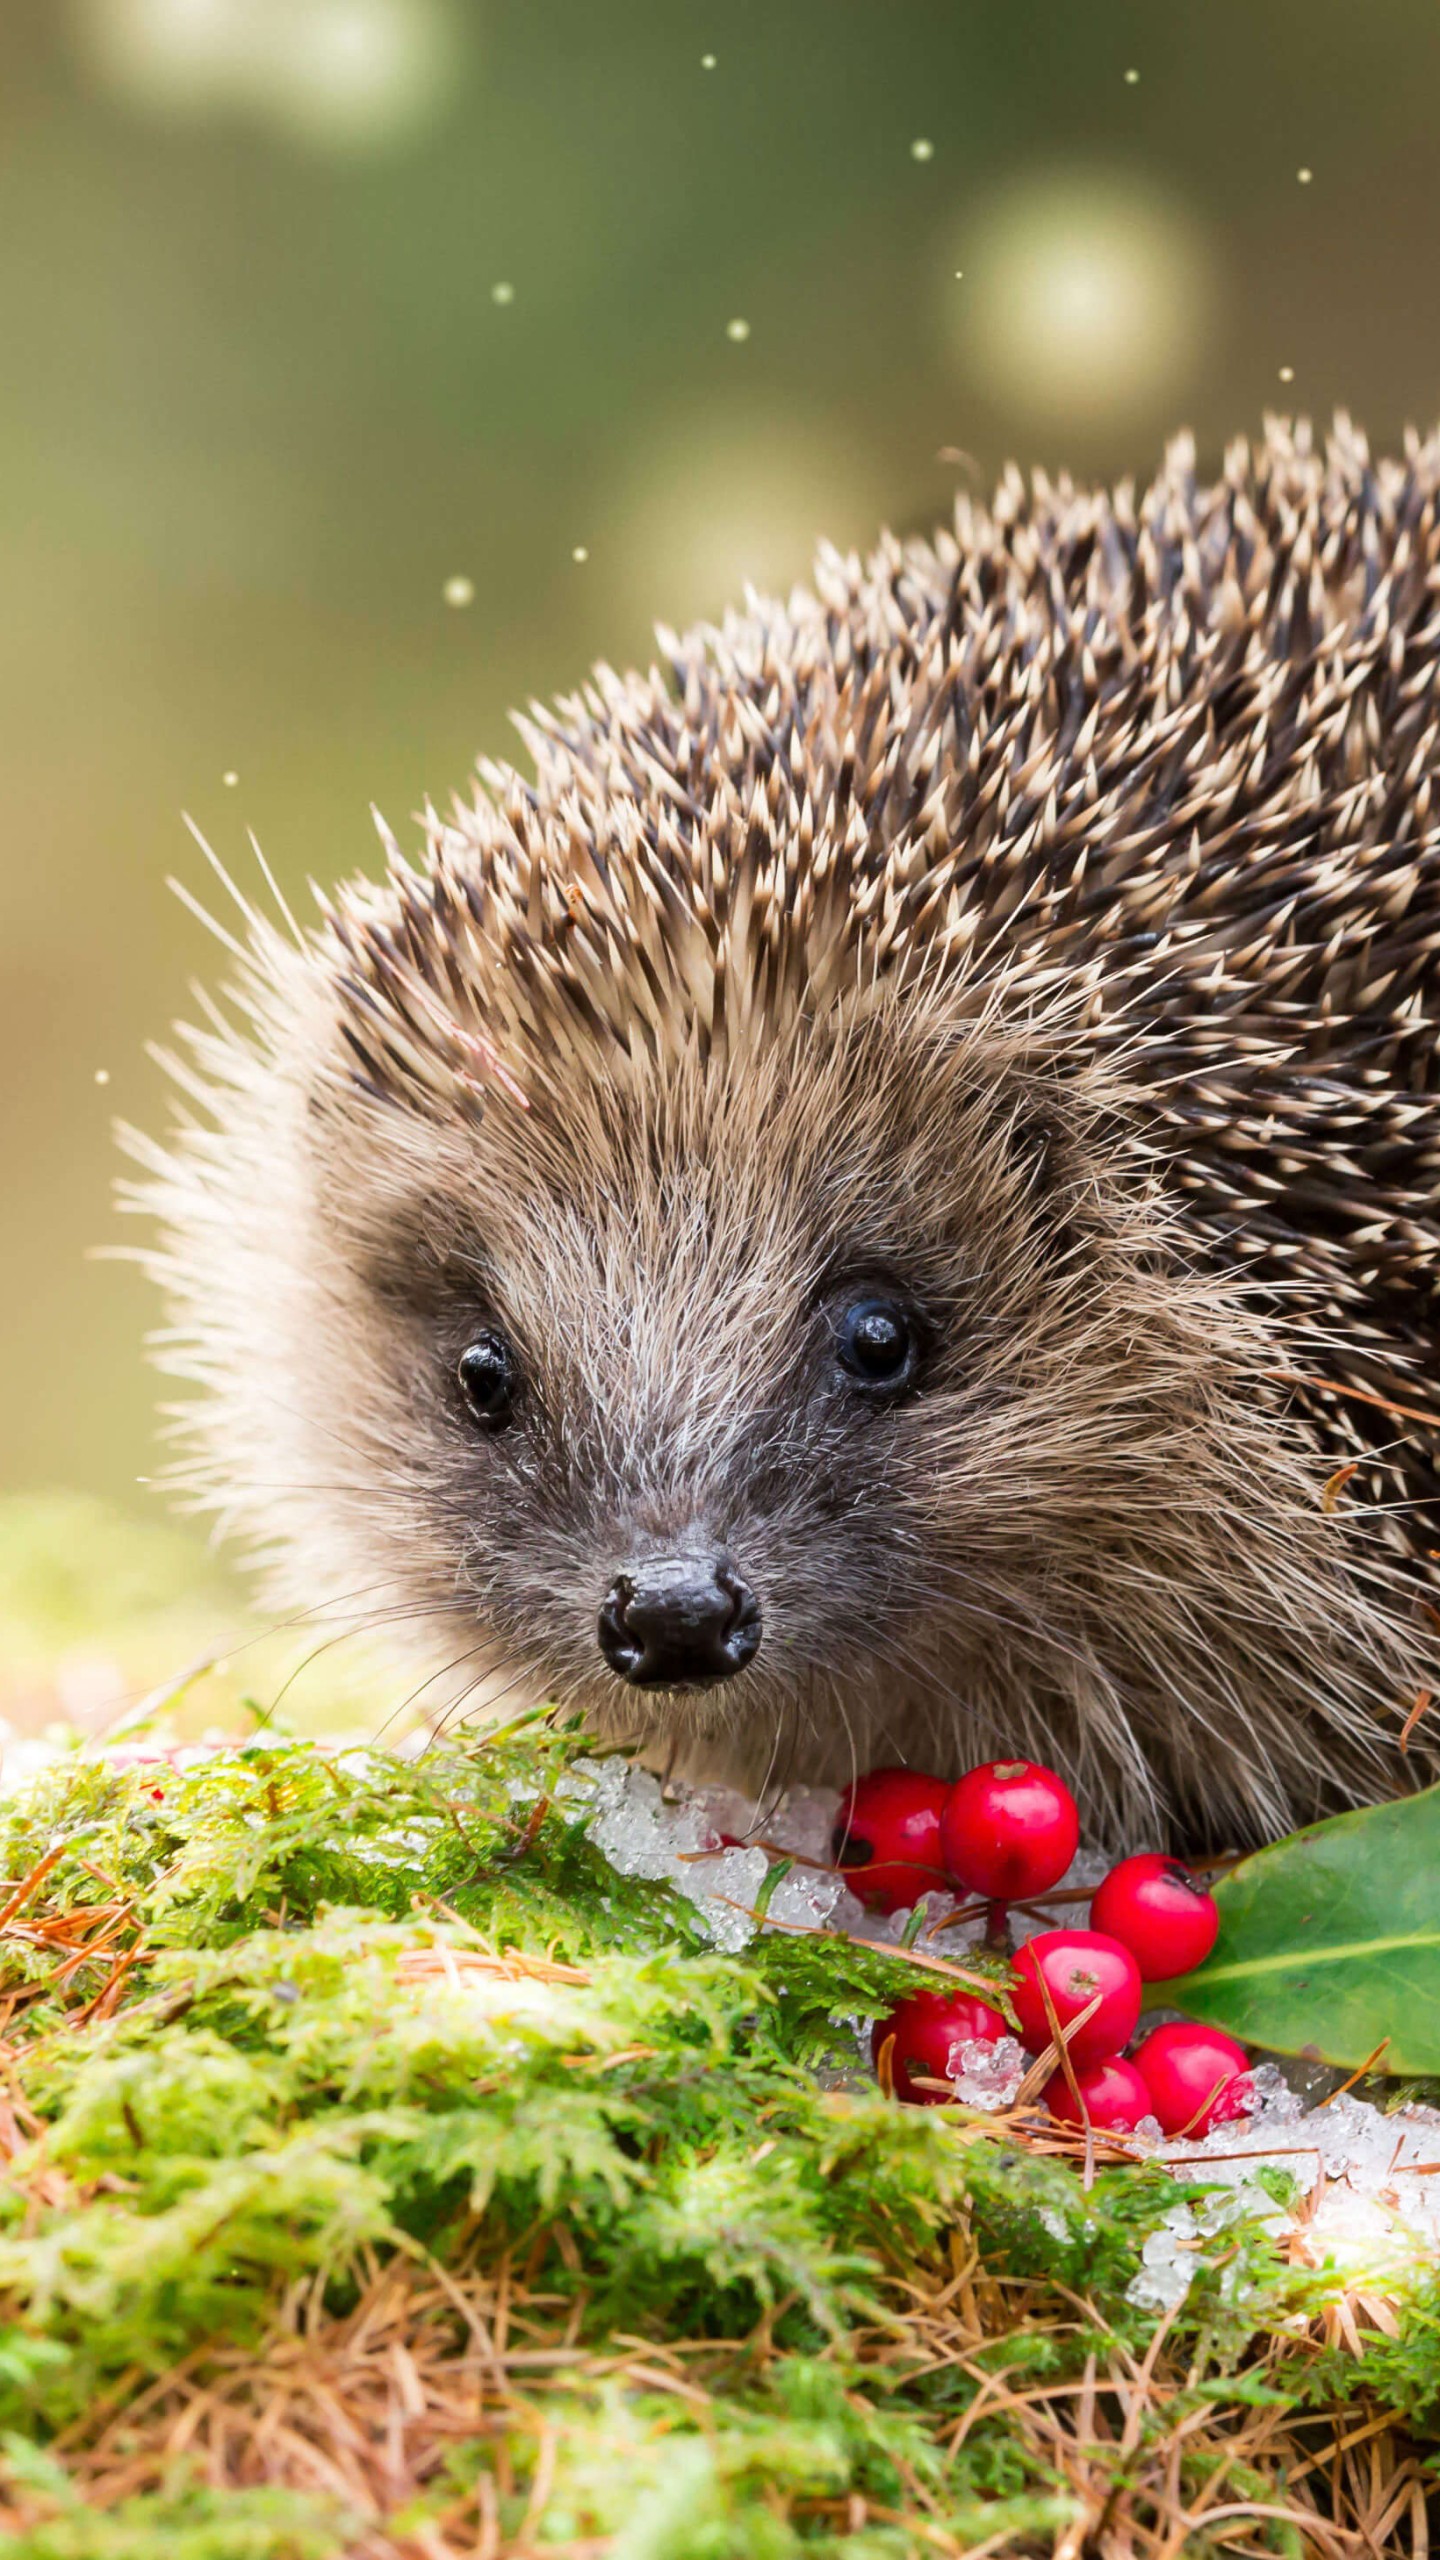 180+ Hedgehog HD Wallpapers and Backgrounds